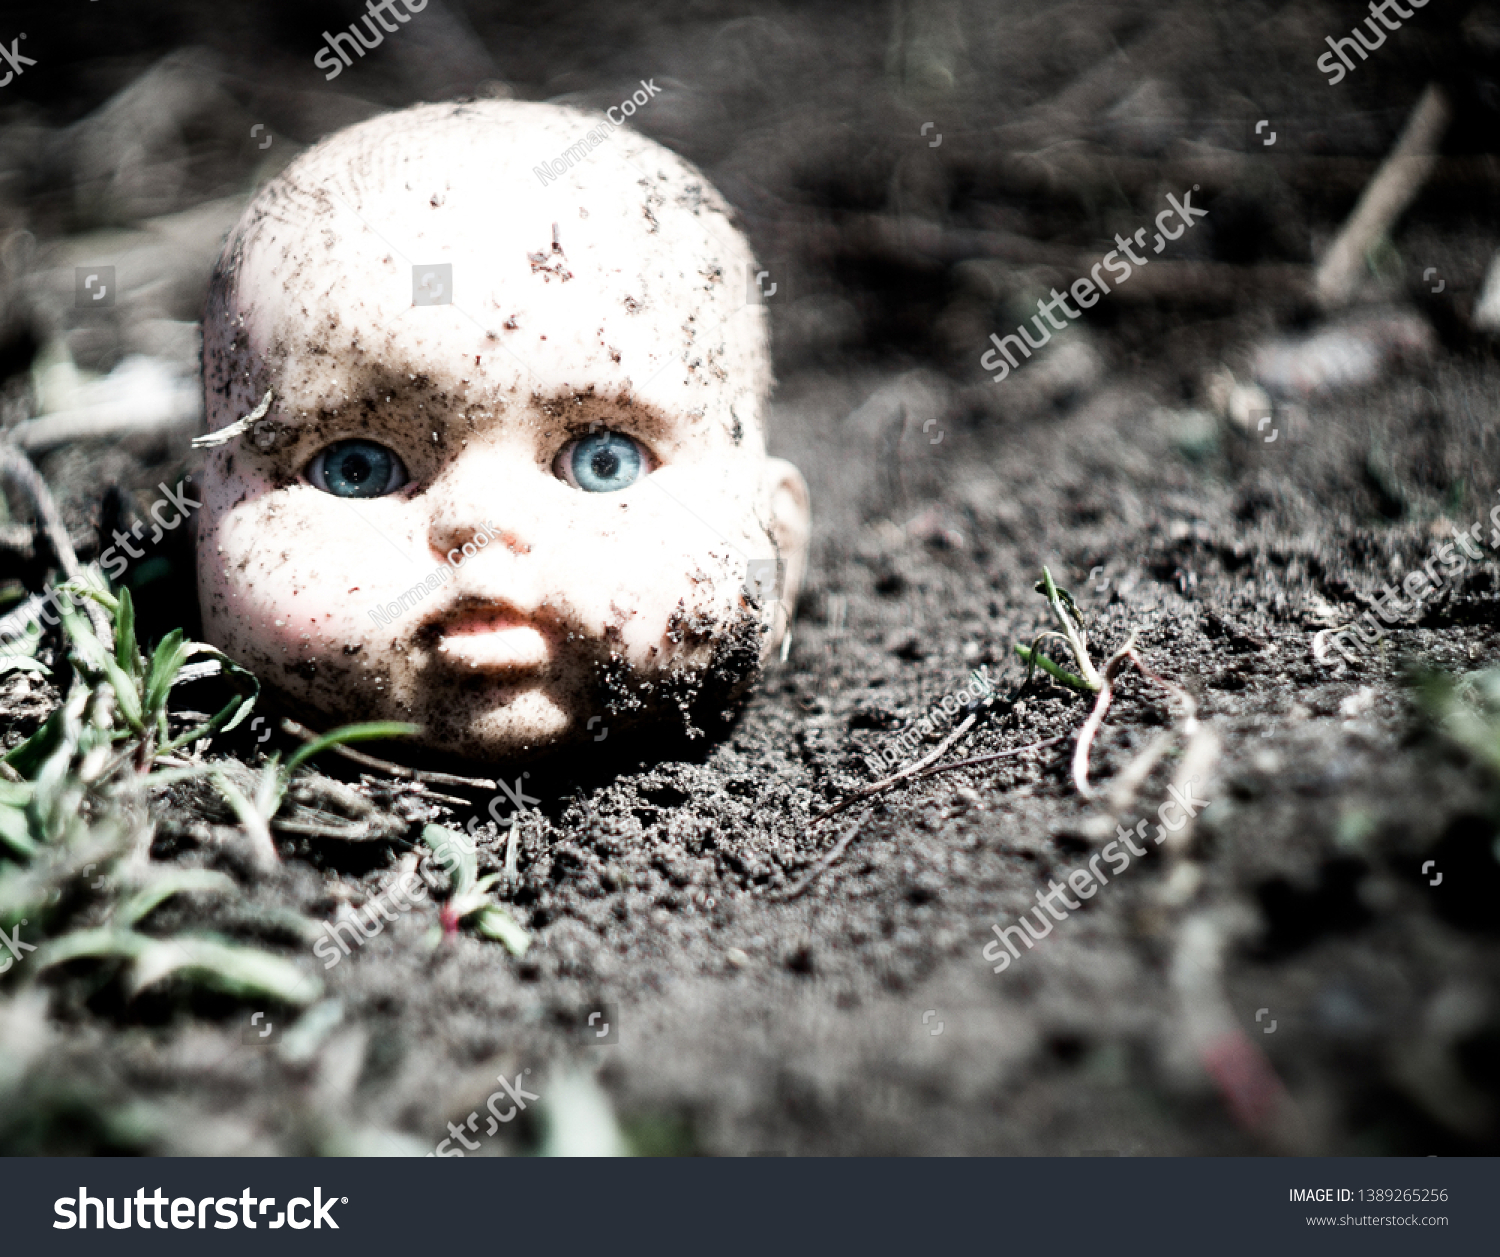 Old broken scary doll head on a ground in abandoned village. #1389265256